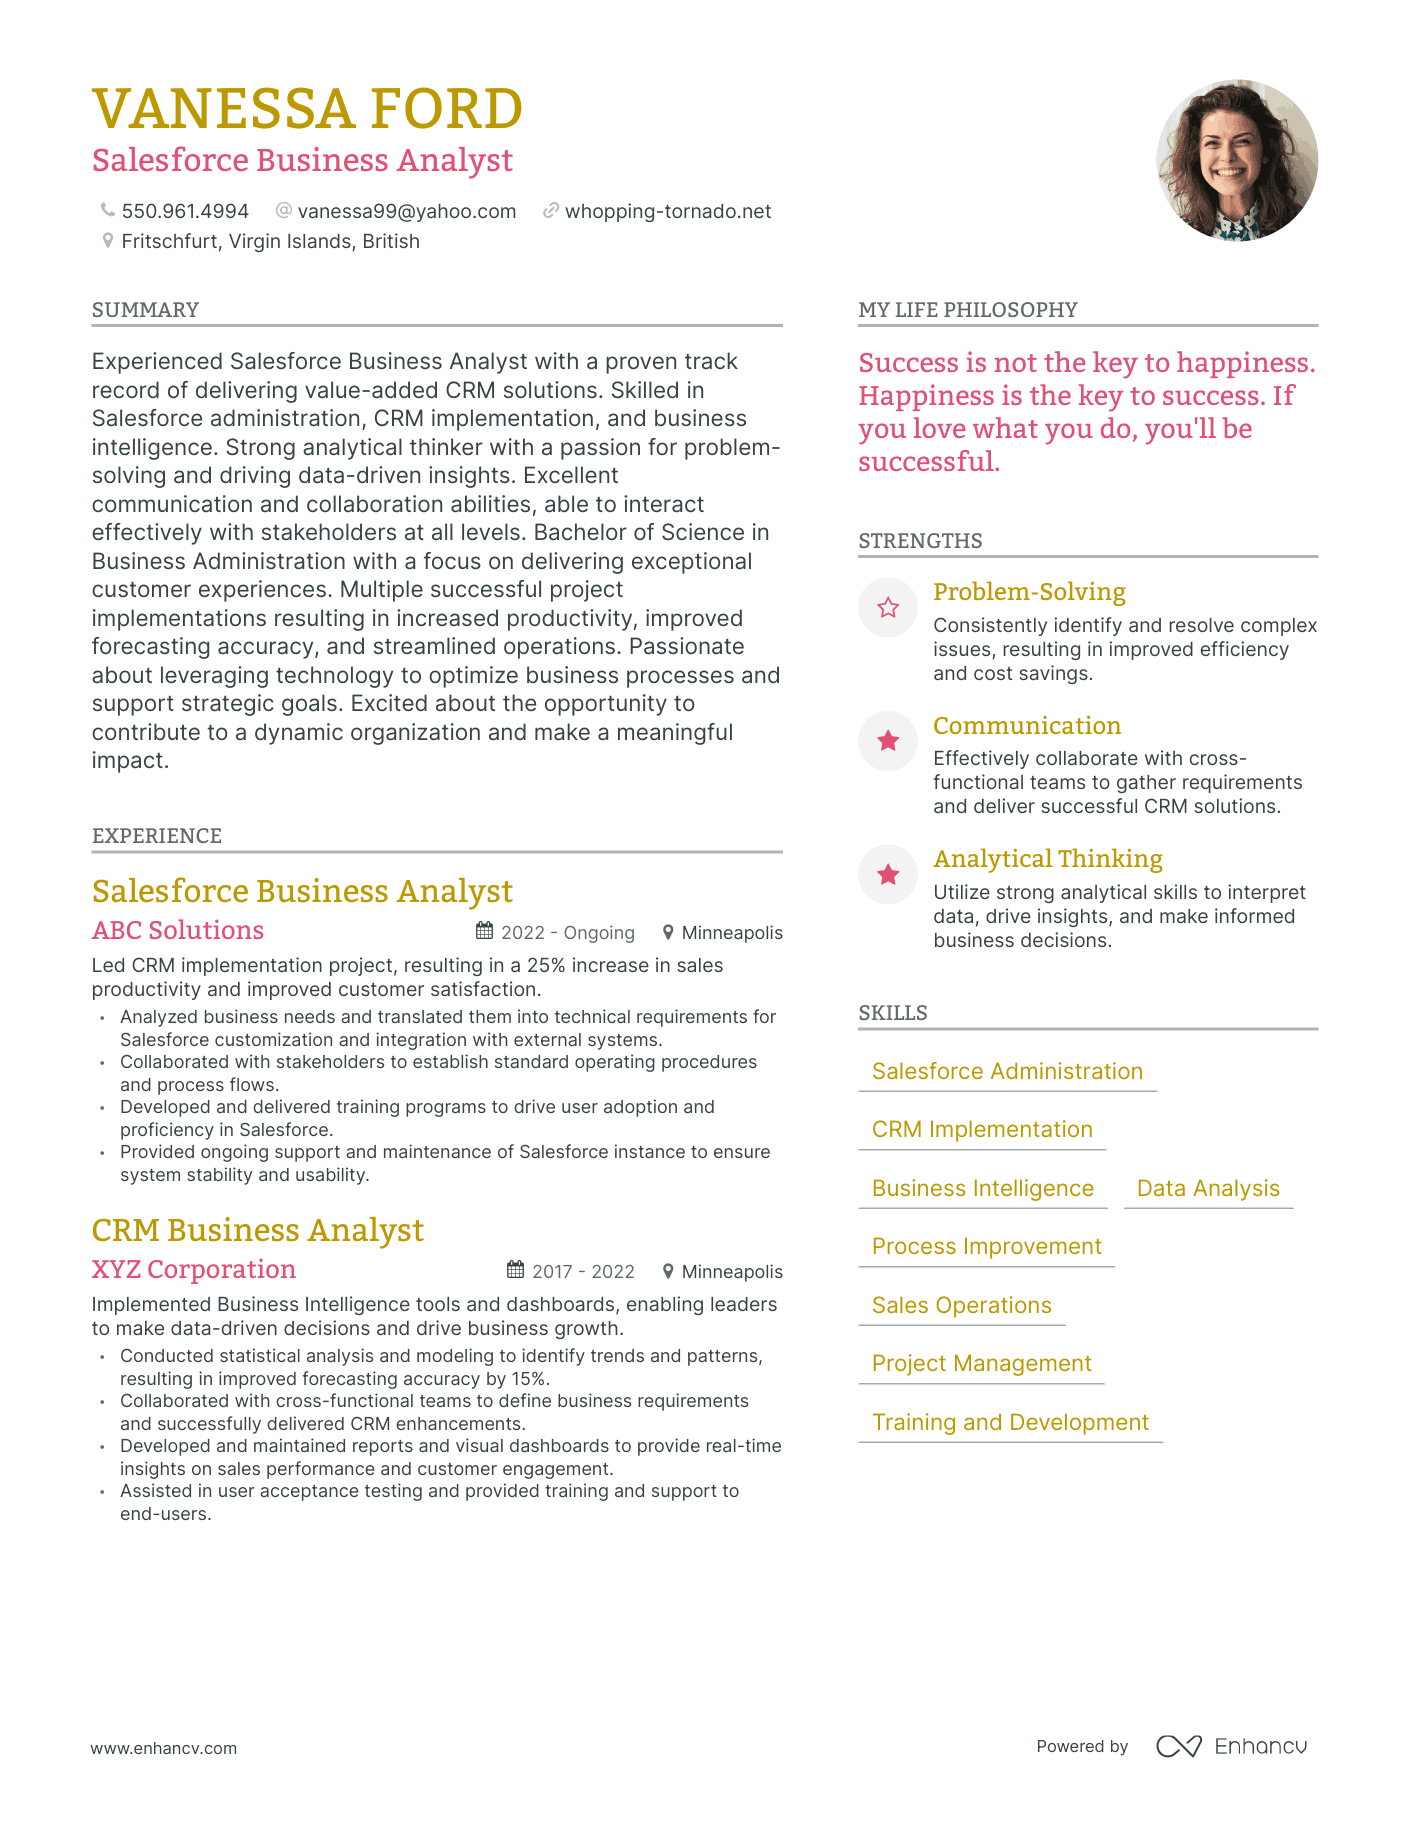 Salesforce Business Analyst resume example